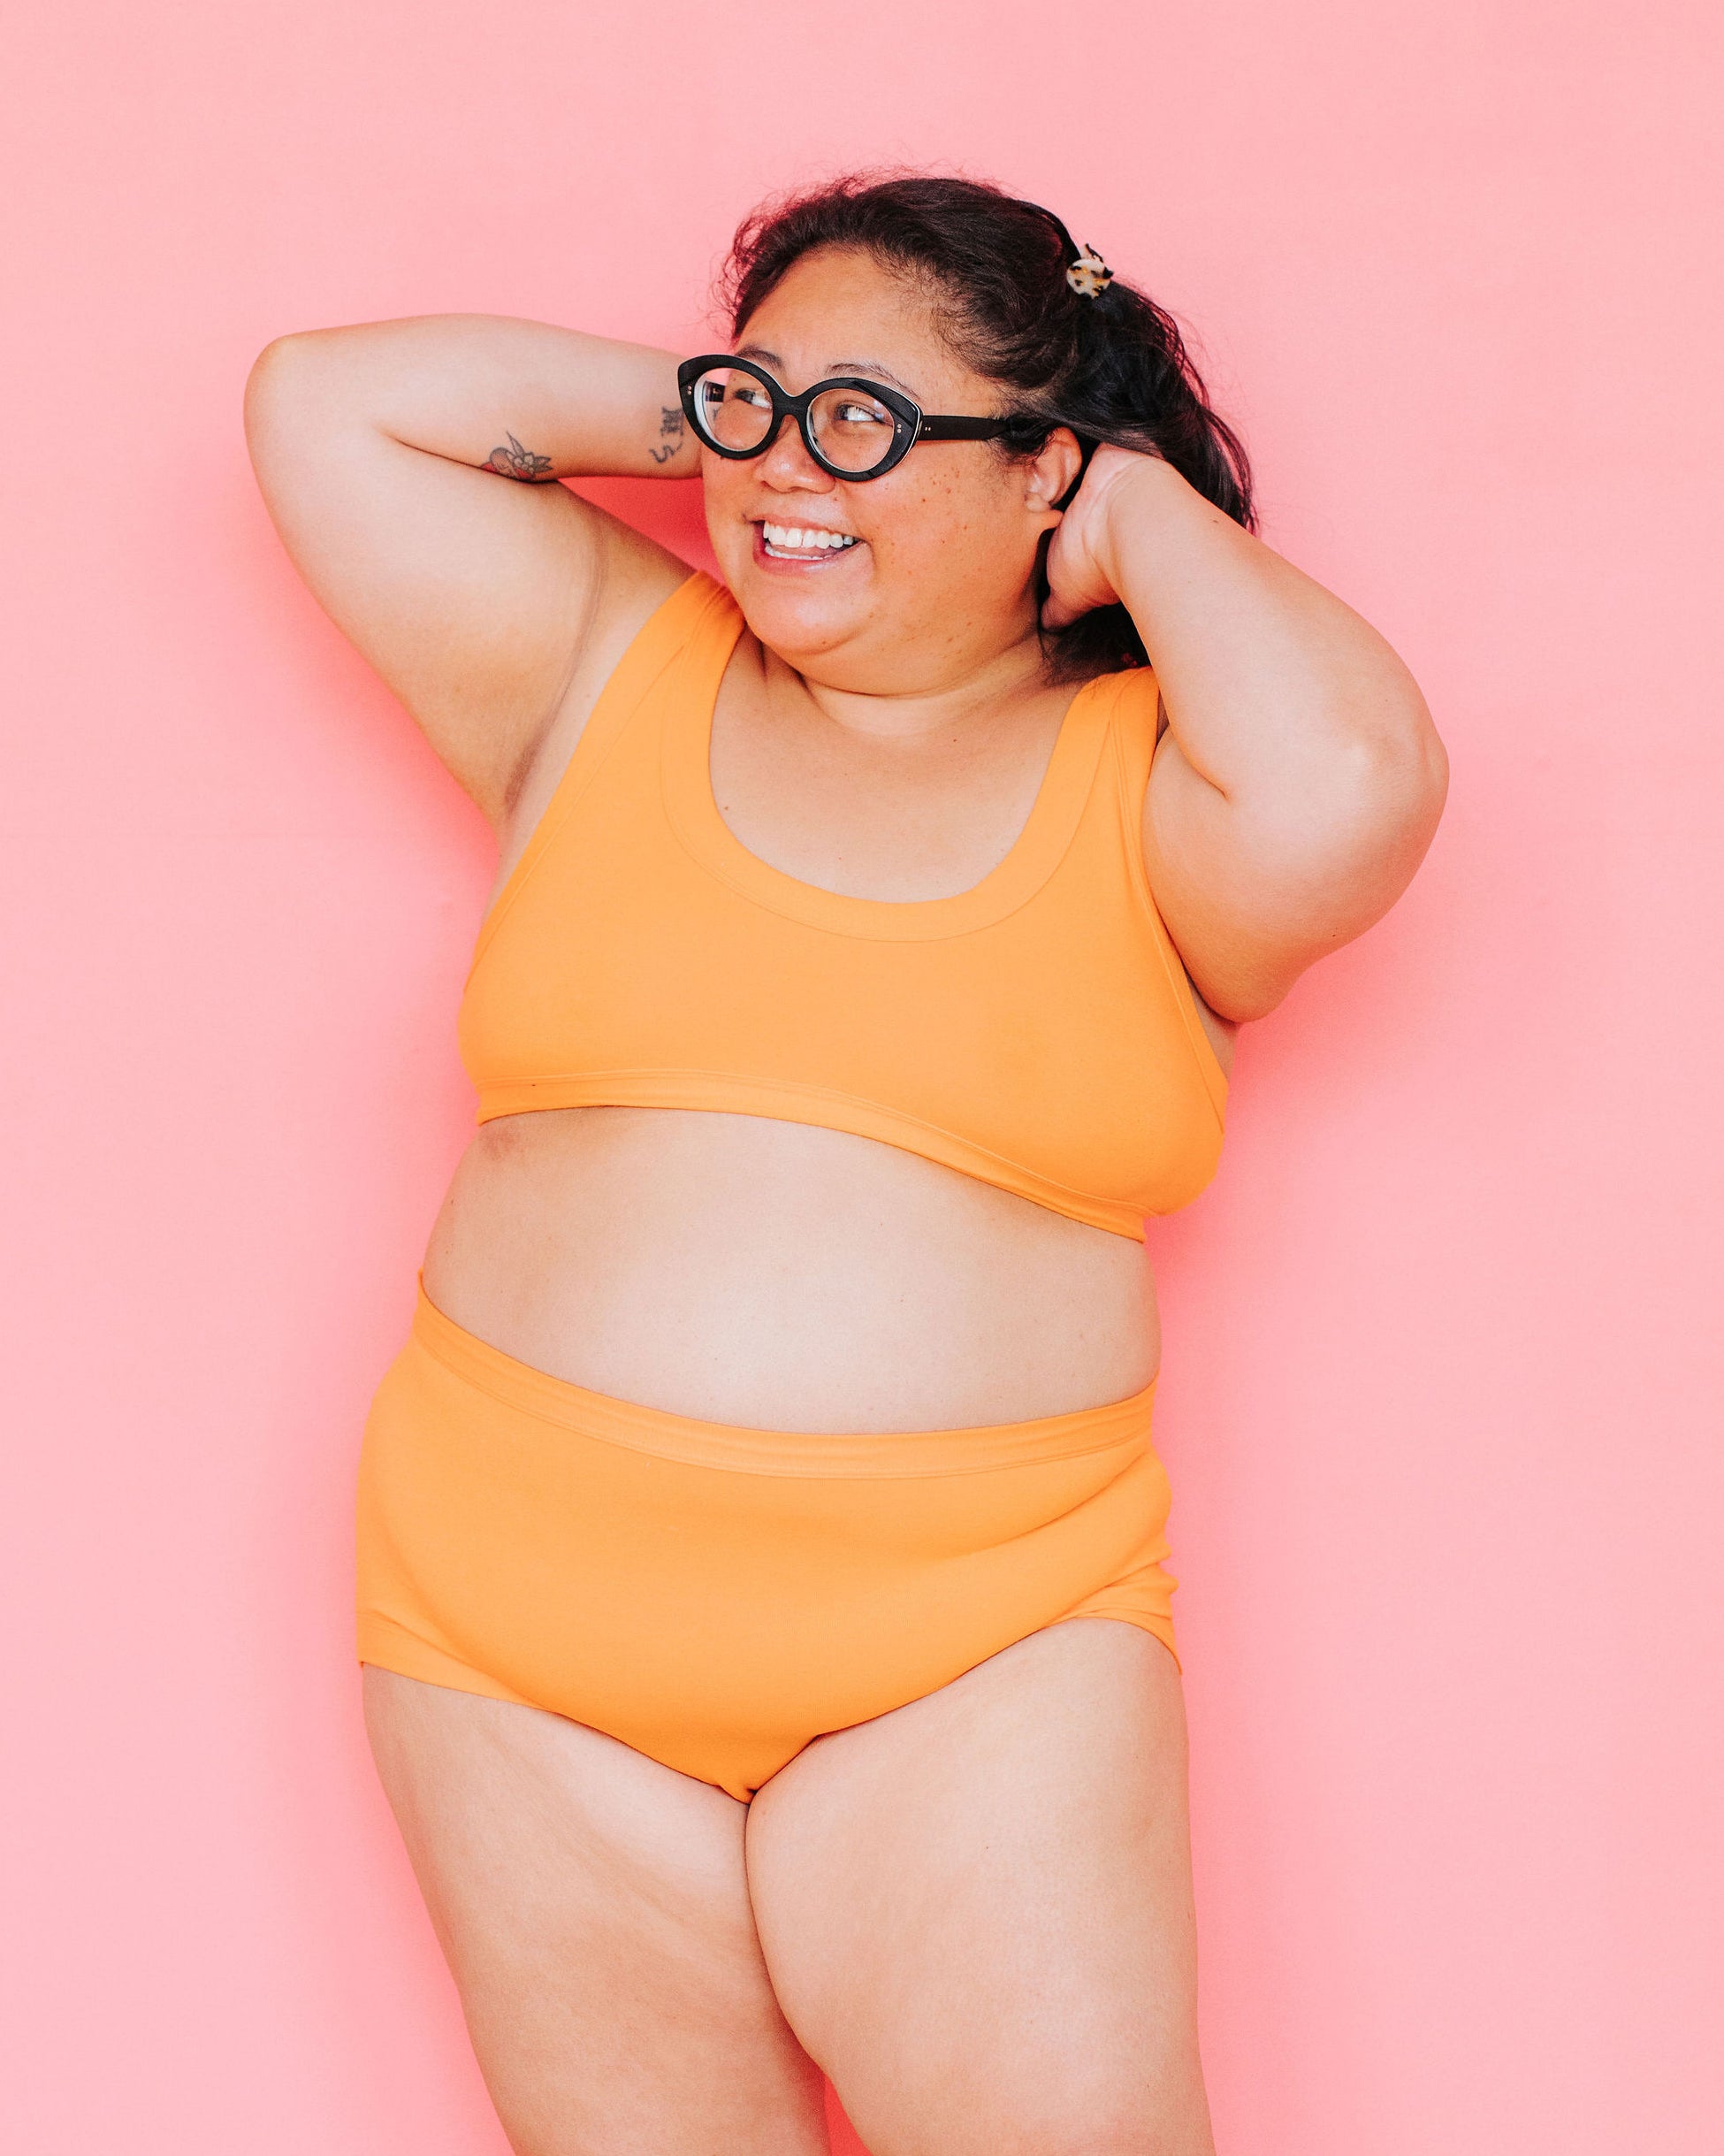 Model smiling in front of pink background wearing a Bralette and Original style underwear in the orange color Oregon Sunstone.